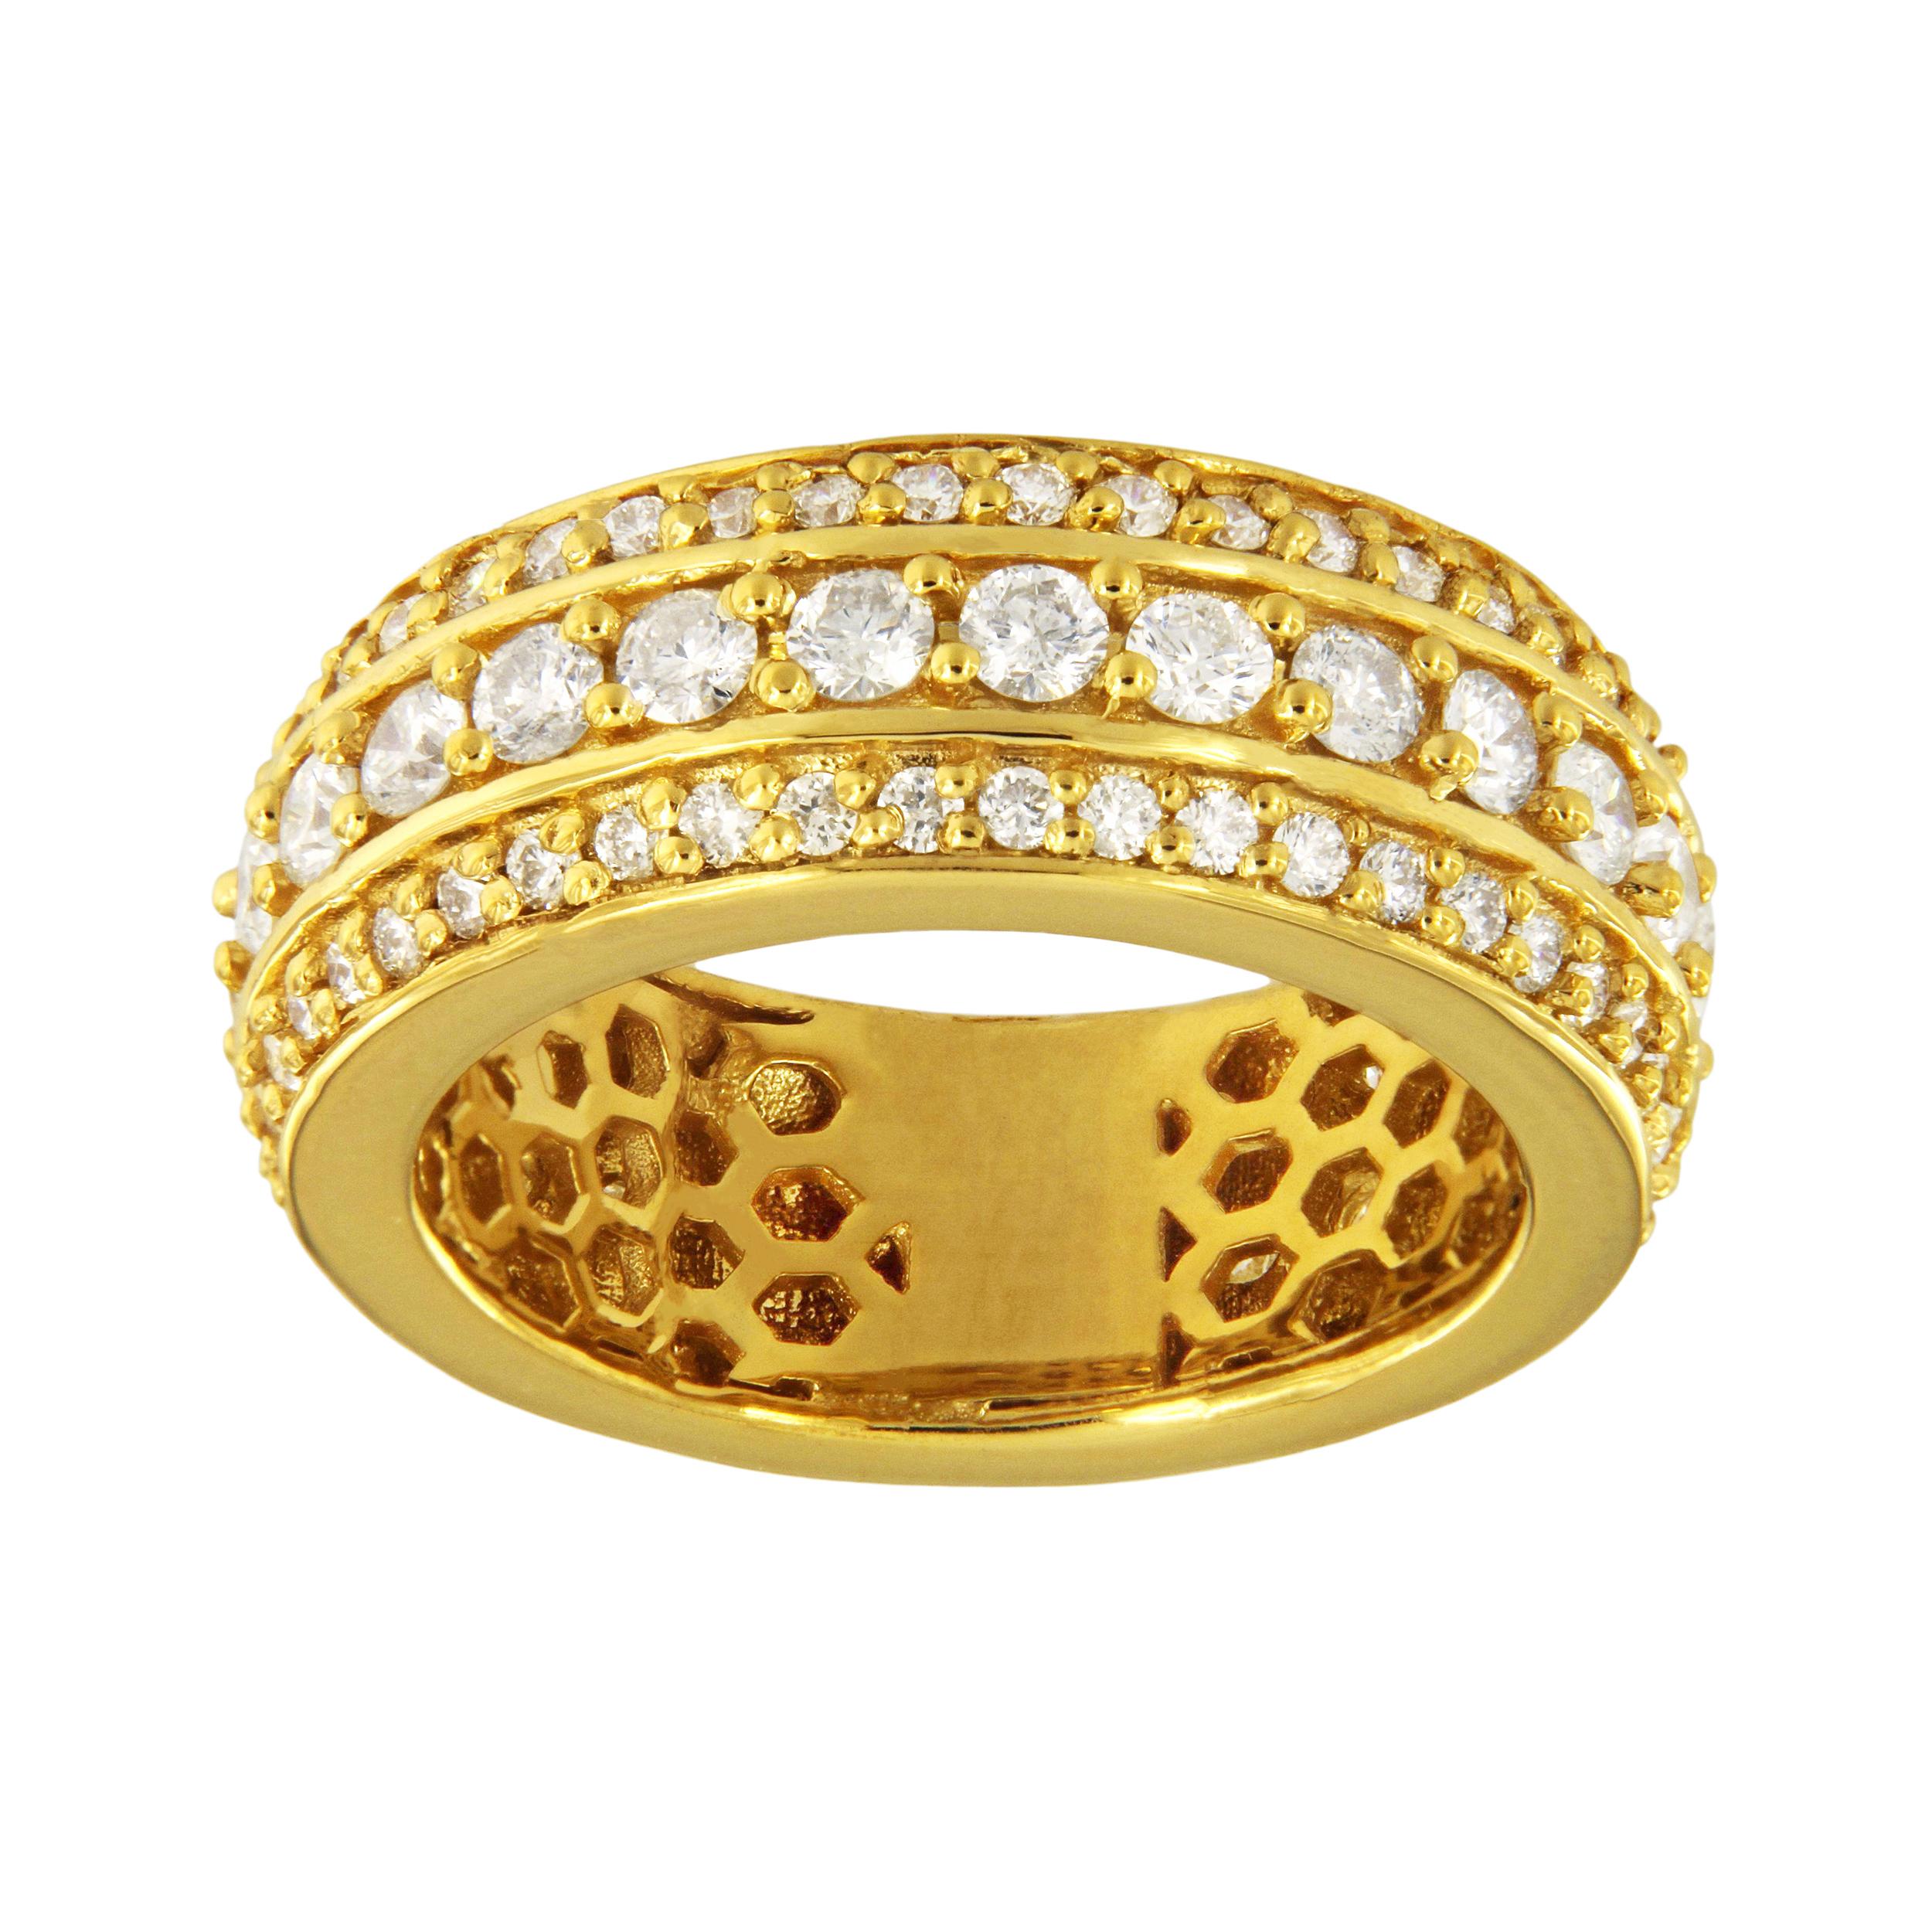 14k Yellow Gold
Ring size: 10
Ring Width: 9.2mm
Ring Weight: 14.5gr
Diamond: 3.00 ct, SI1 Clarity
Original Retail: $ 4,900